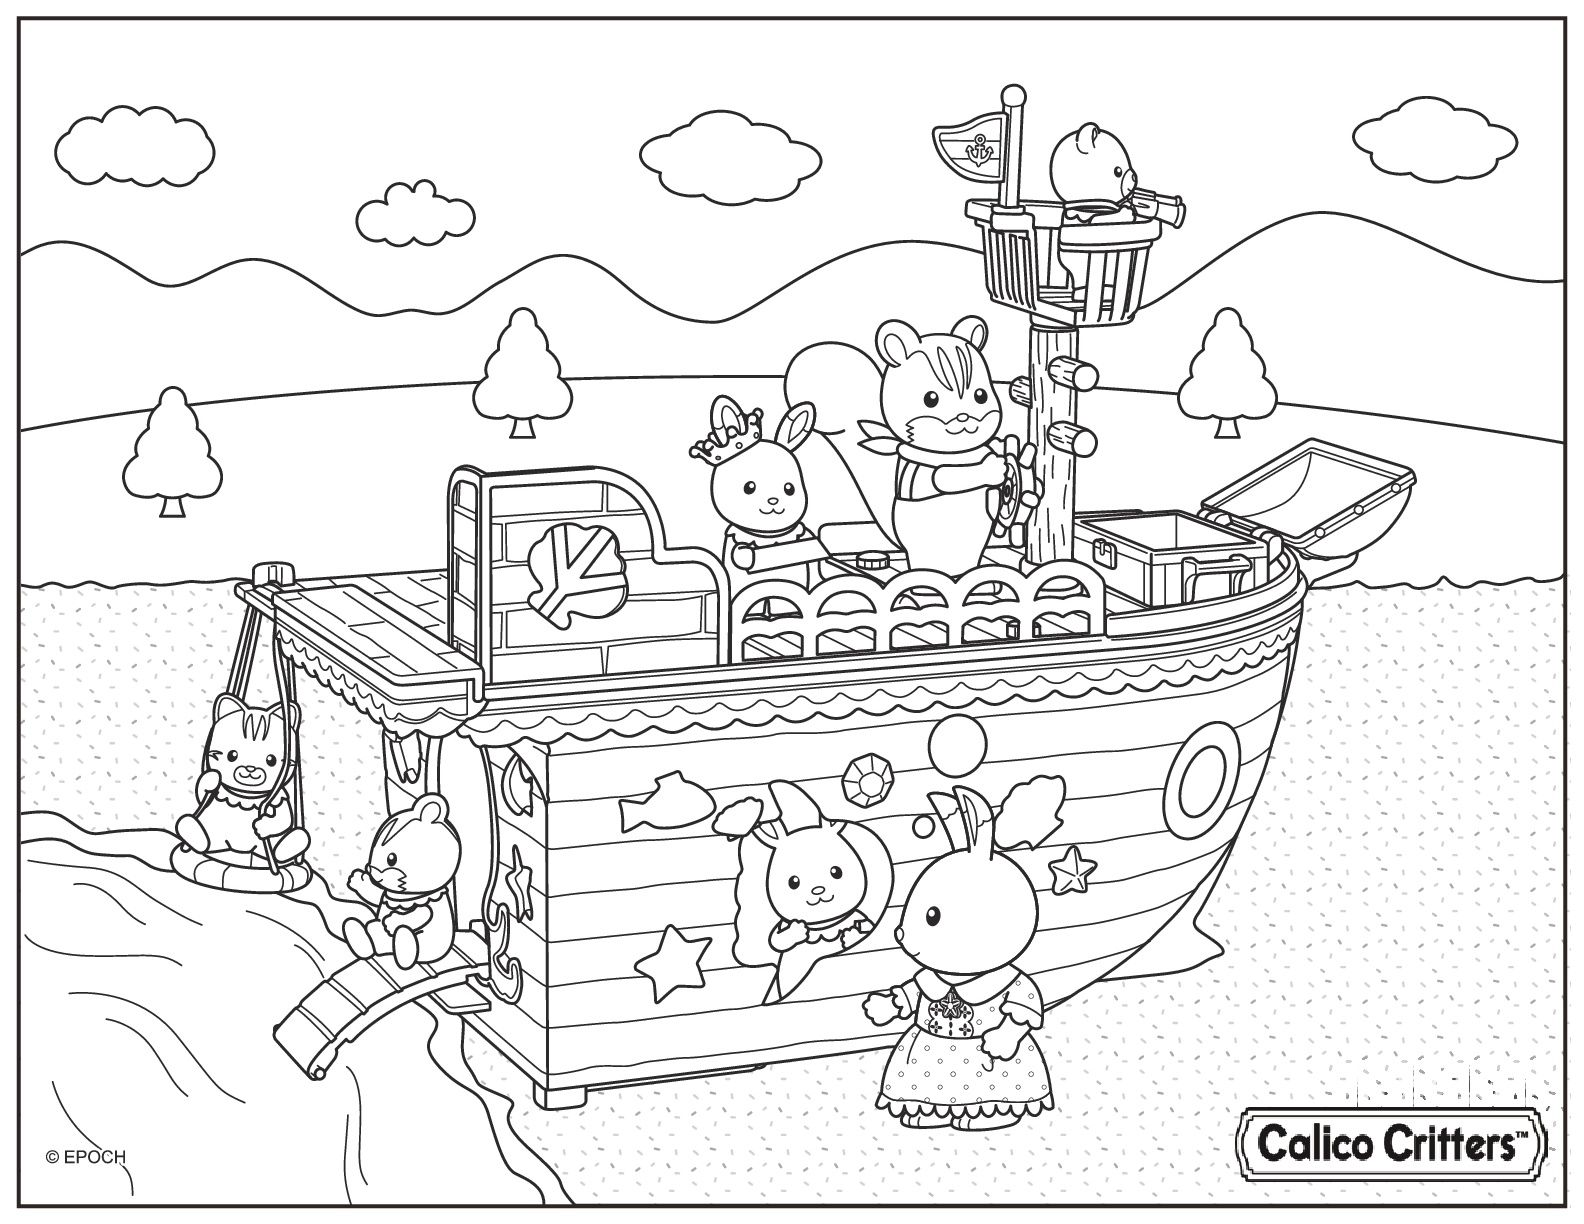 Calico Critters Boat Trip Captain